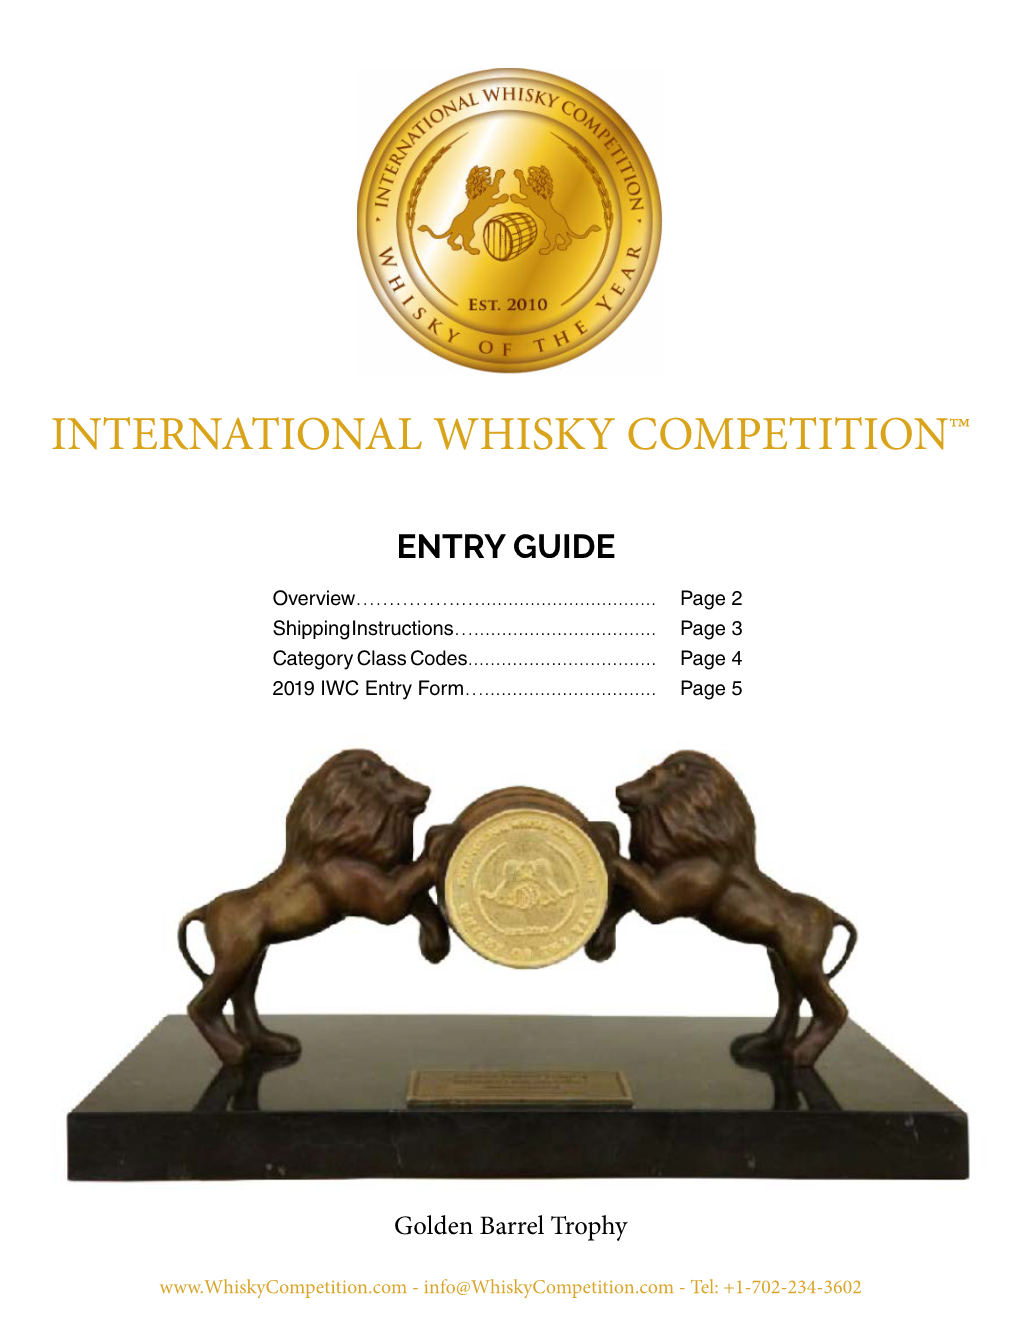 International Whisky Competition®